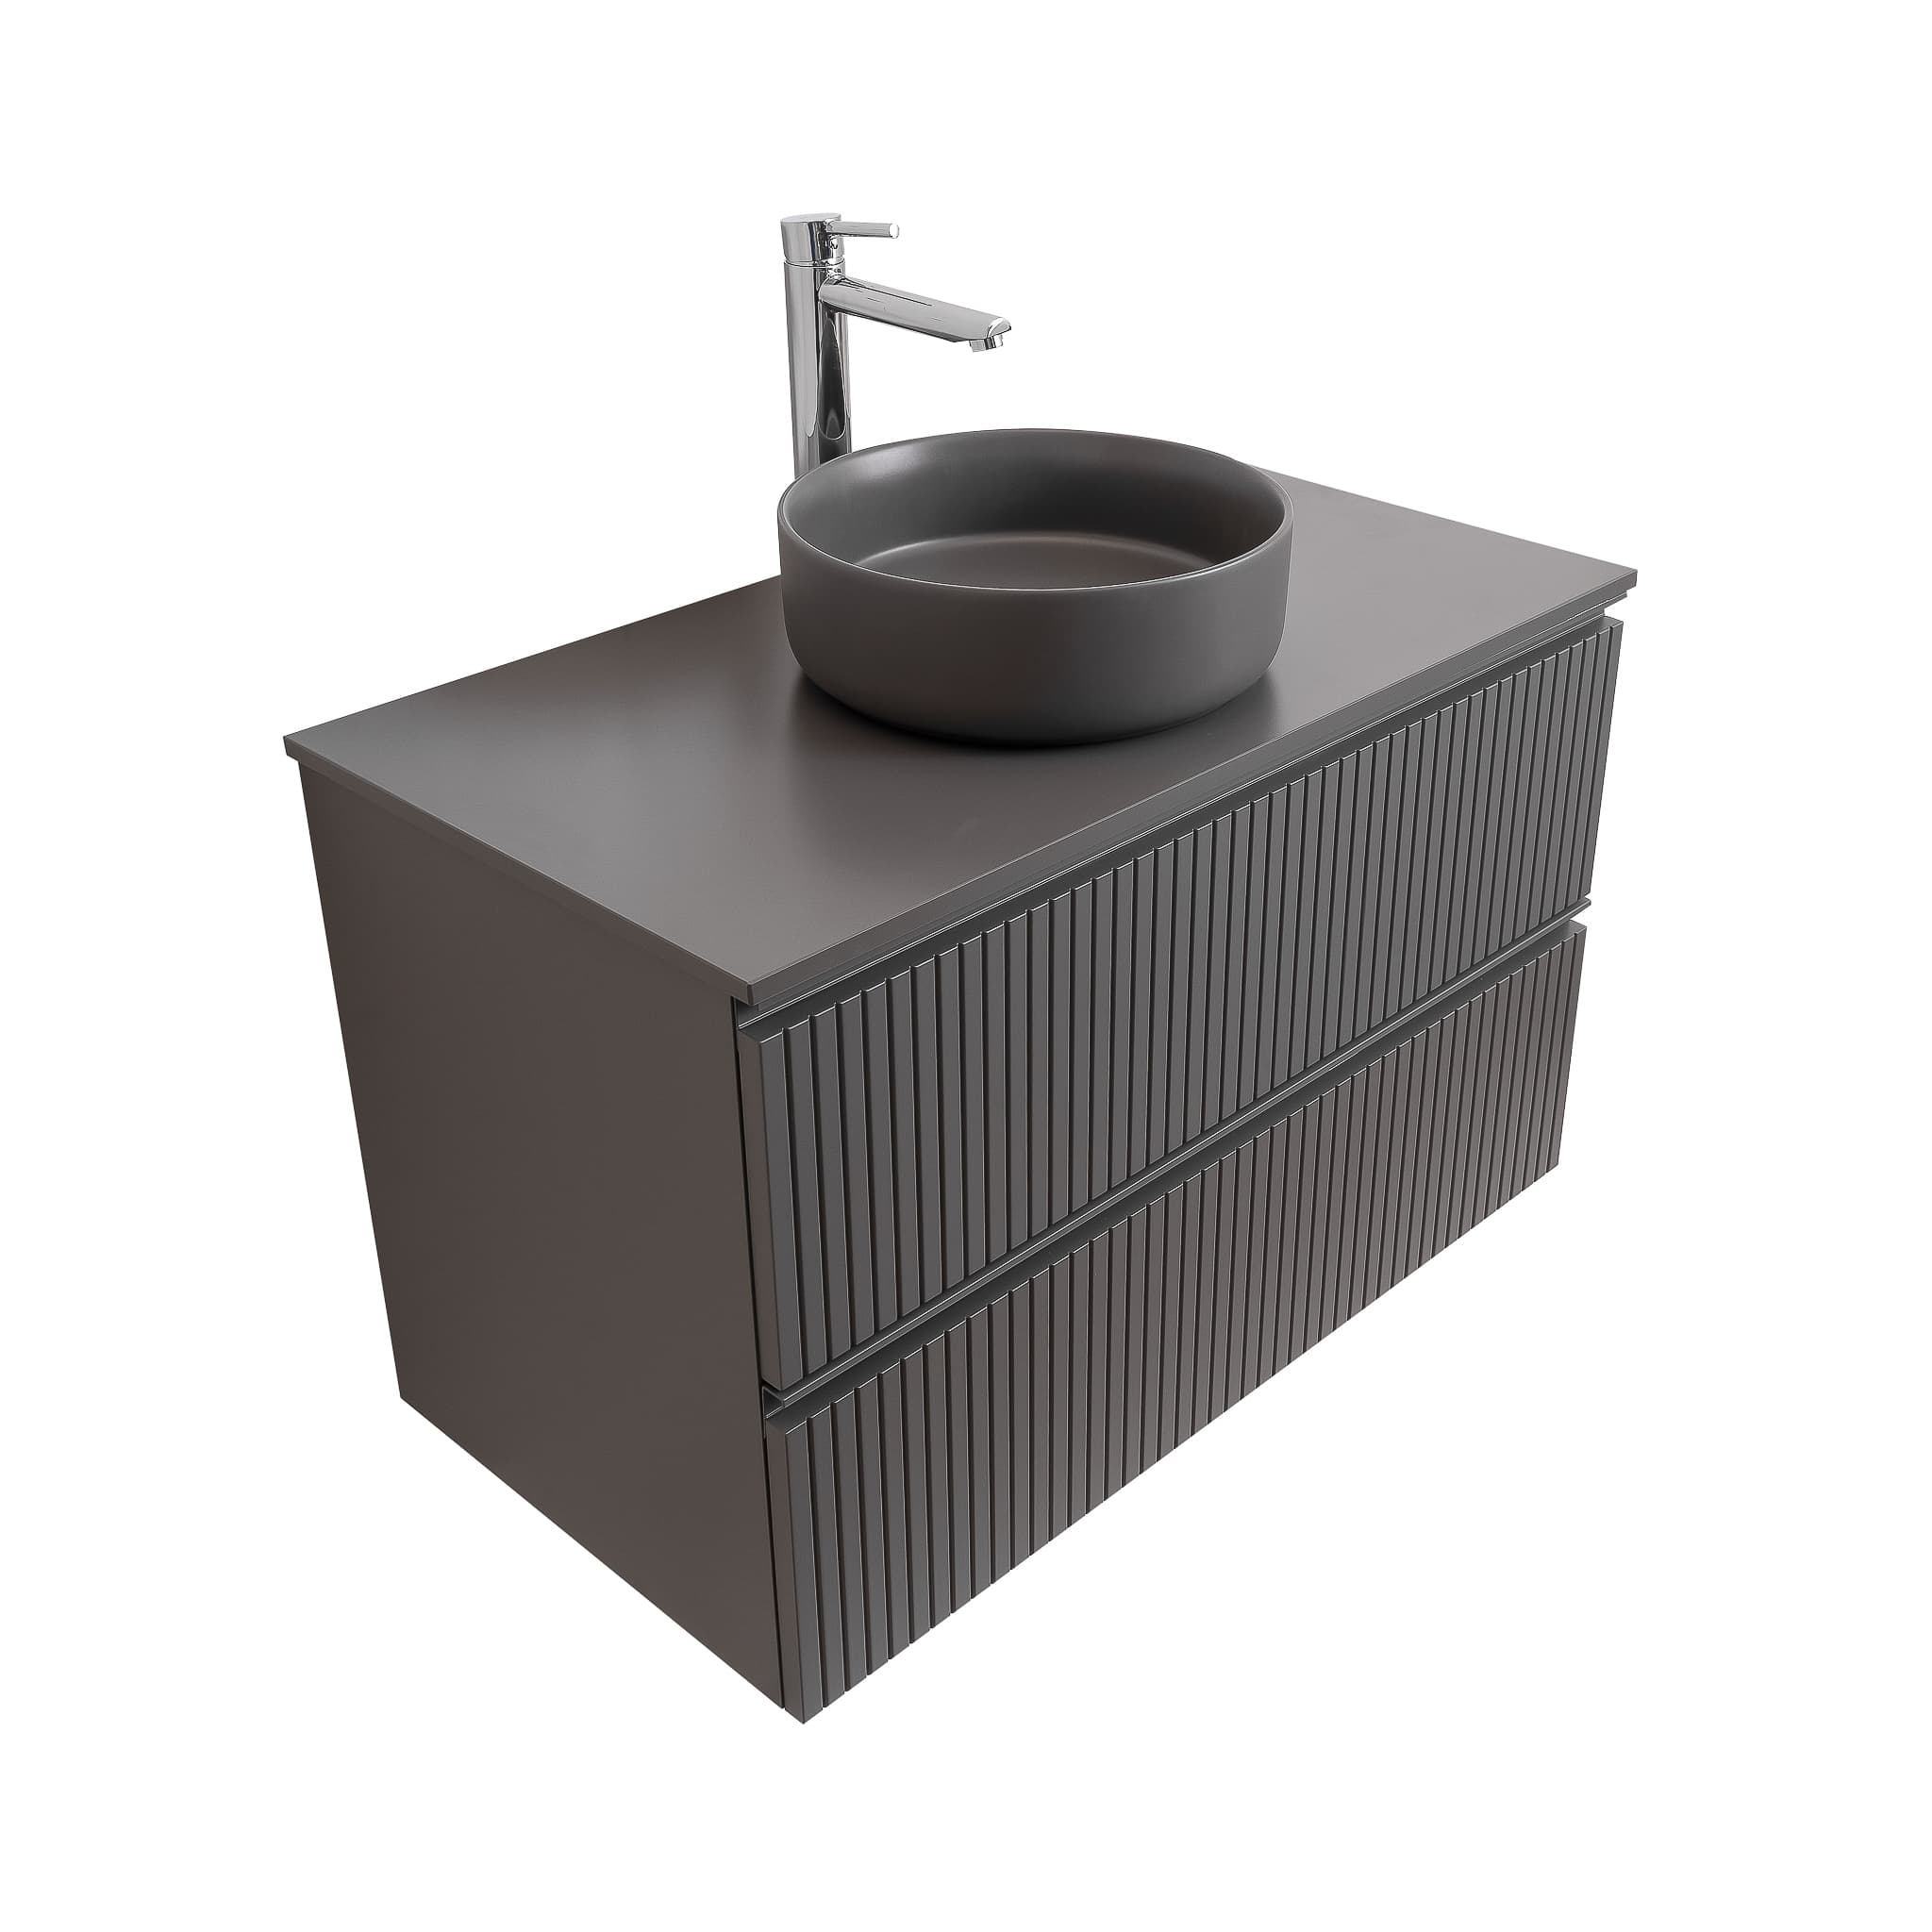 Ares 31.5 Matte Grey Cabinet, Ares Grey Ceniza Top And Ares Grey Ceniza Ceramic Basin, Wall Mounted Modern Vanity Set